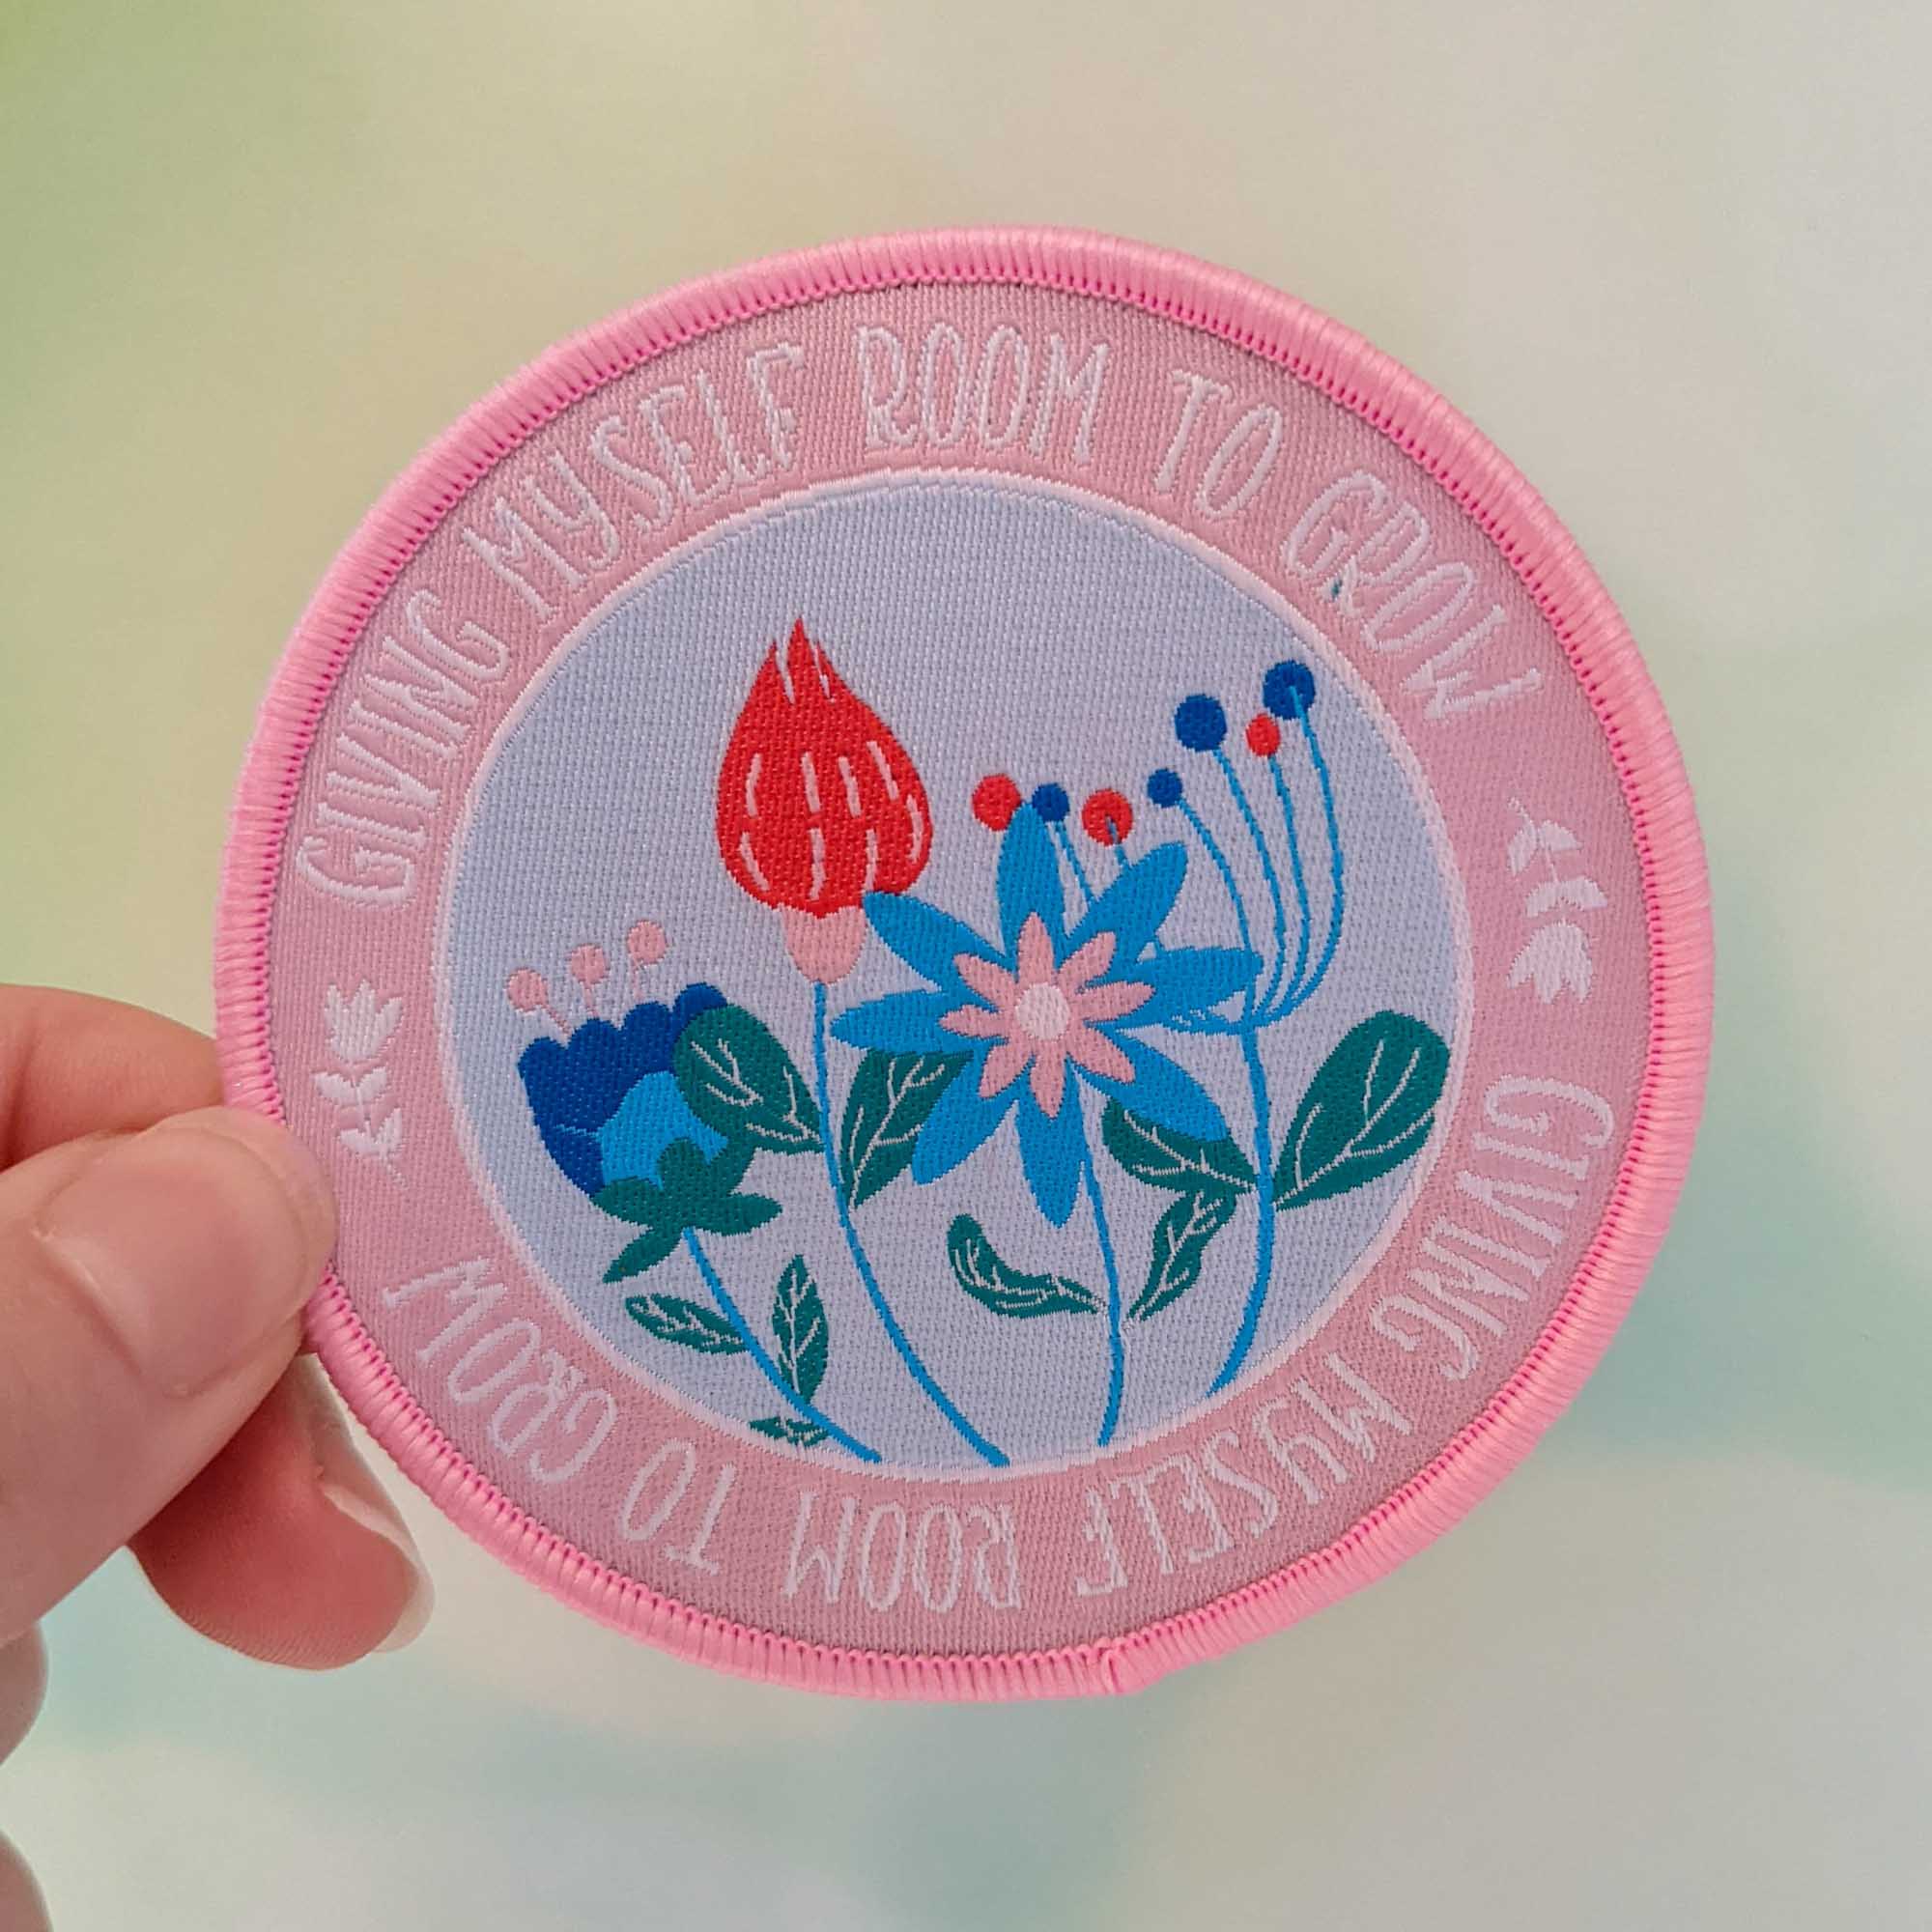 Room to Grow iron-on patch (Pink version / subtle trans pride)